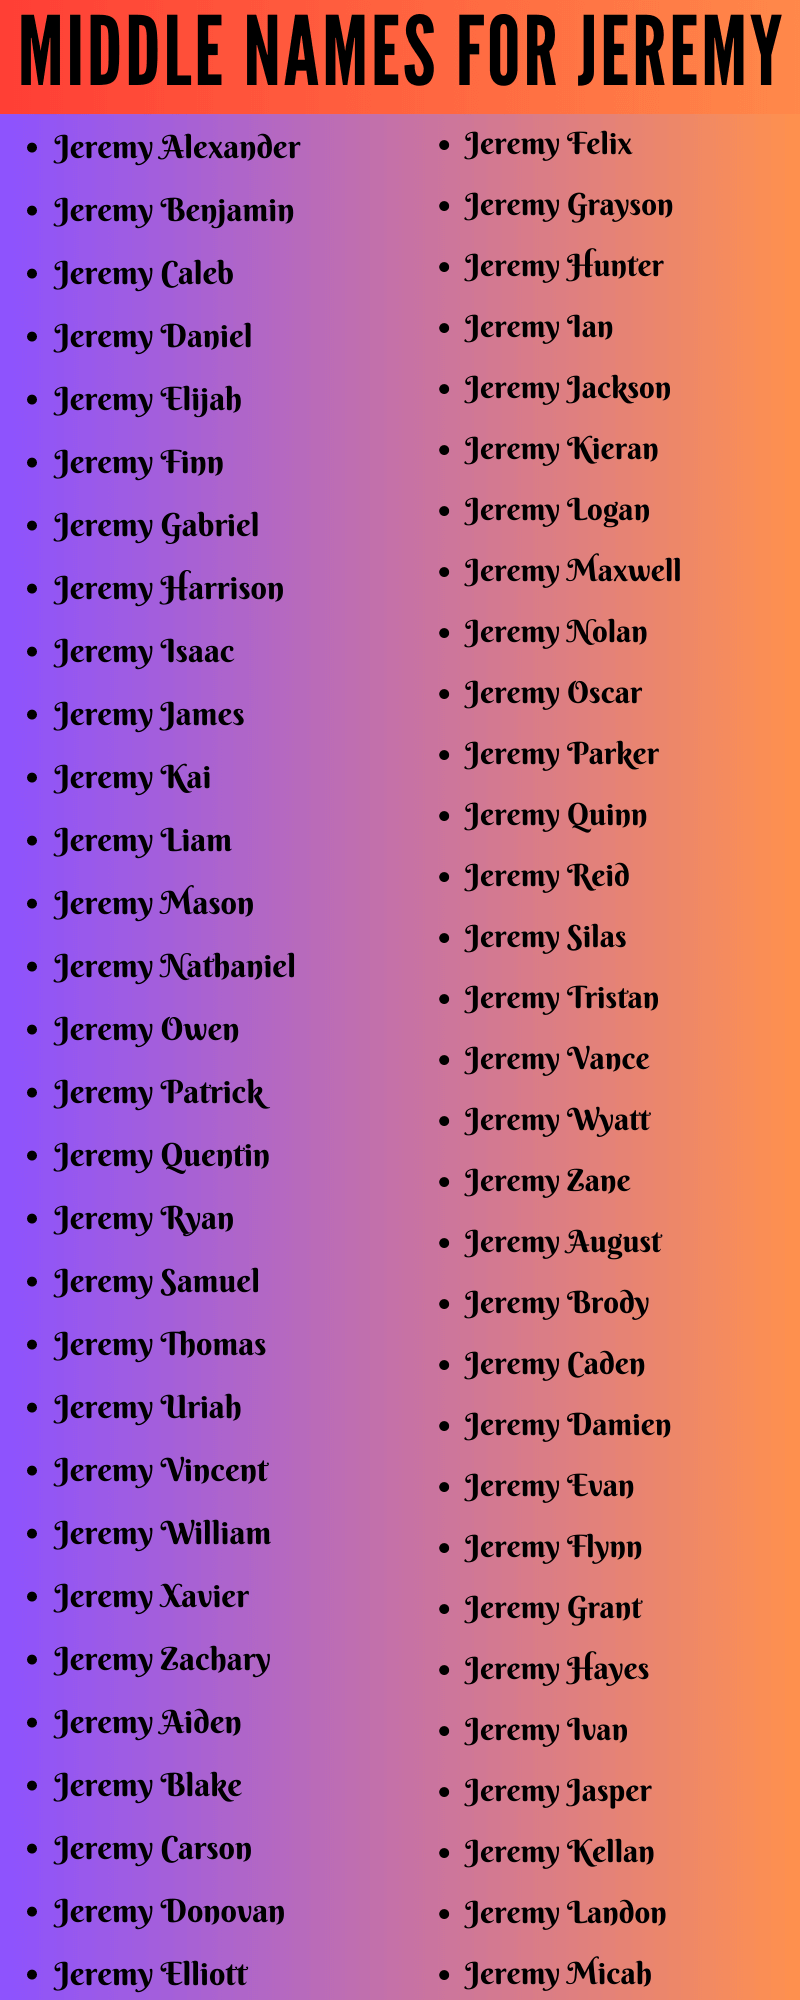 400 Amazing Middle Names For Jeremy